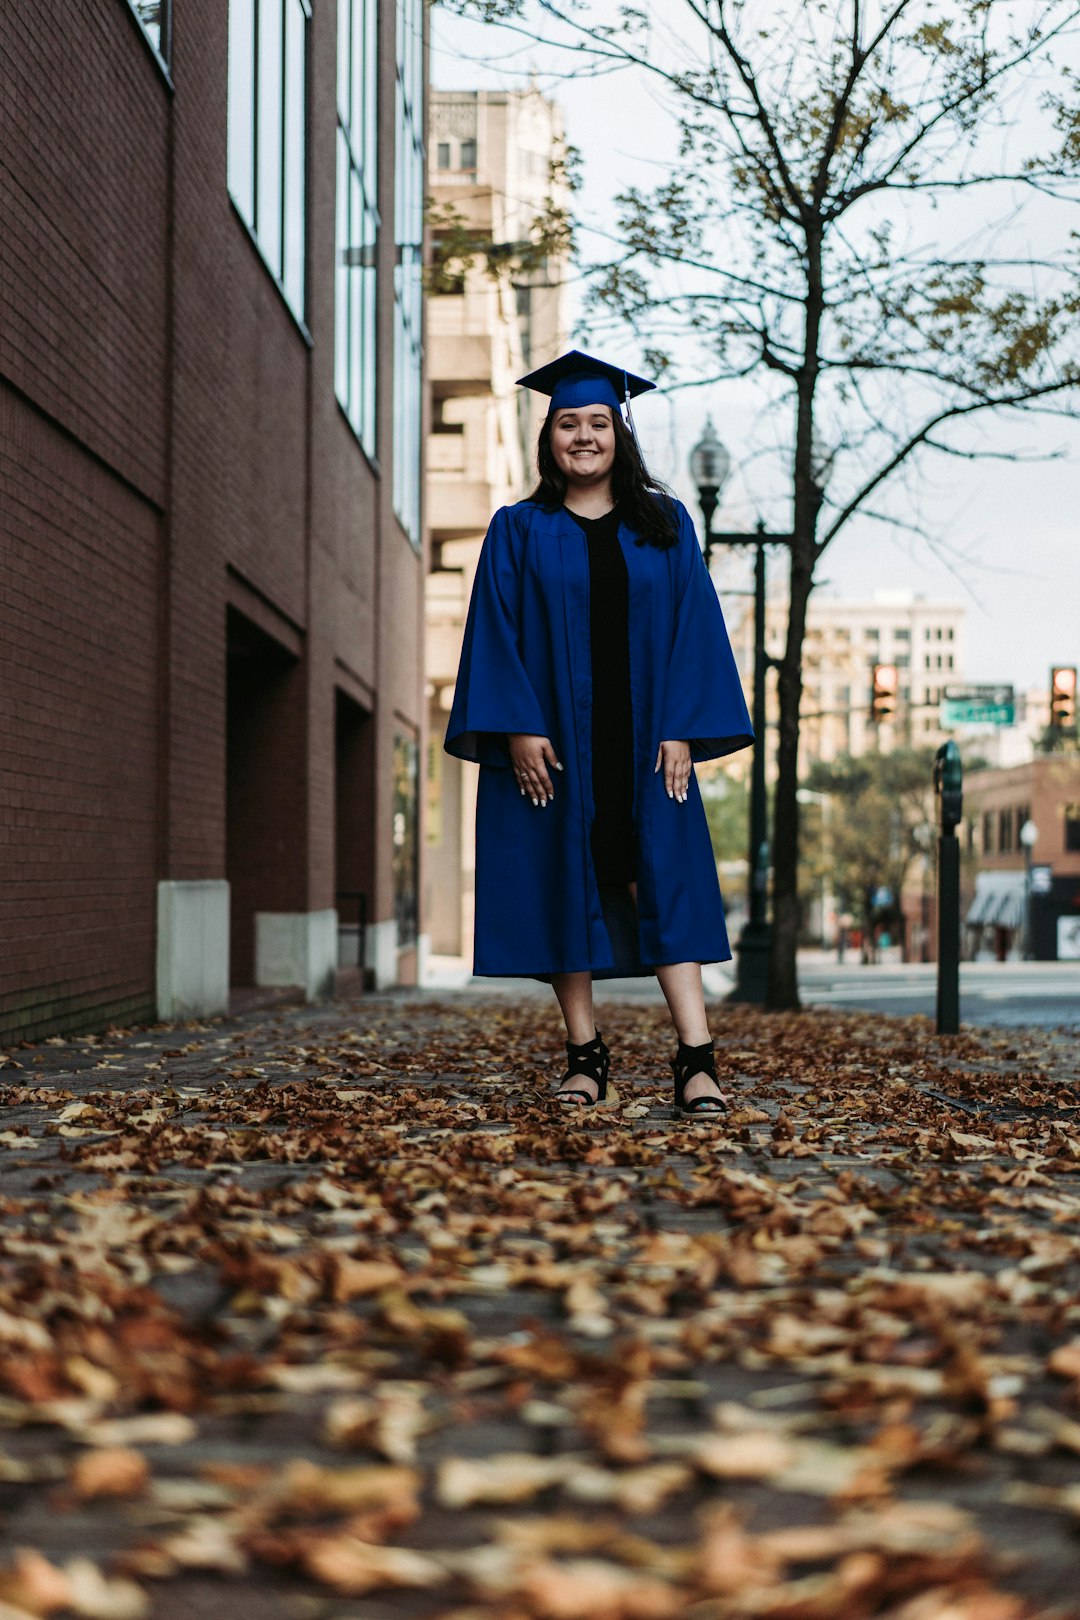 woman in blue academic dress standing on brown dried leaves during daytime